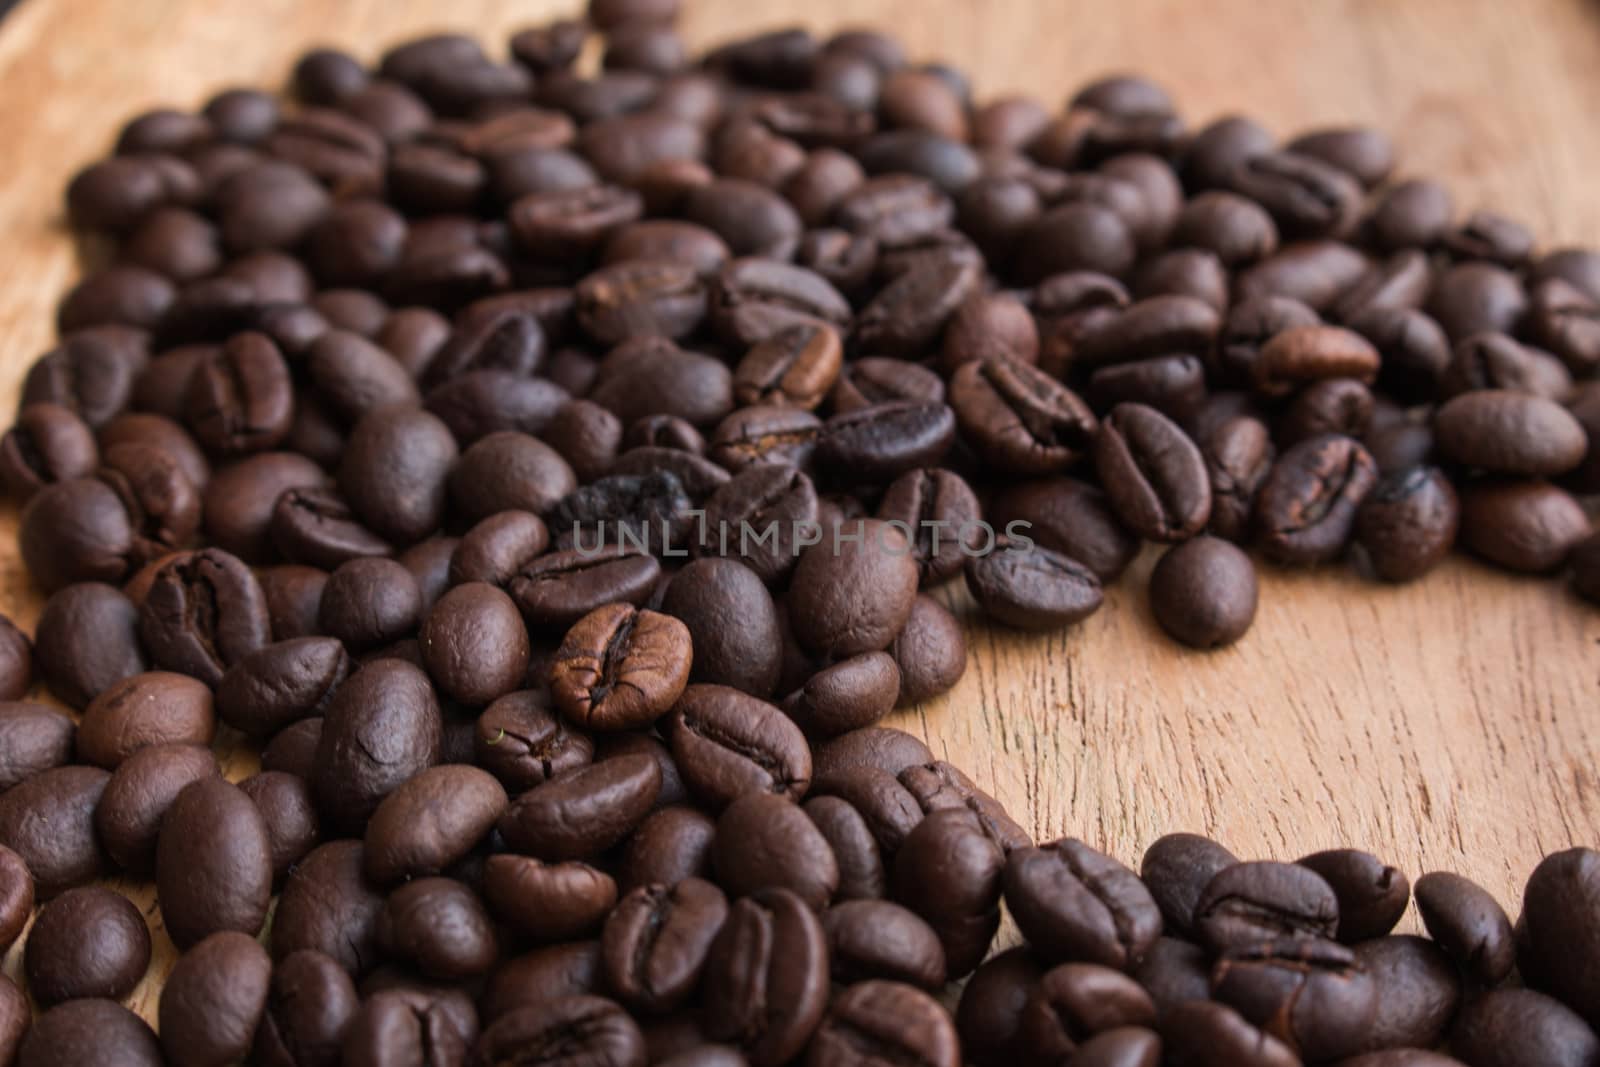 Coffee beans on the wooden floor